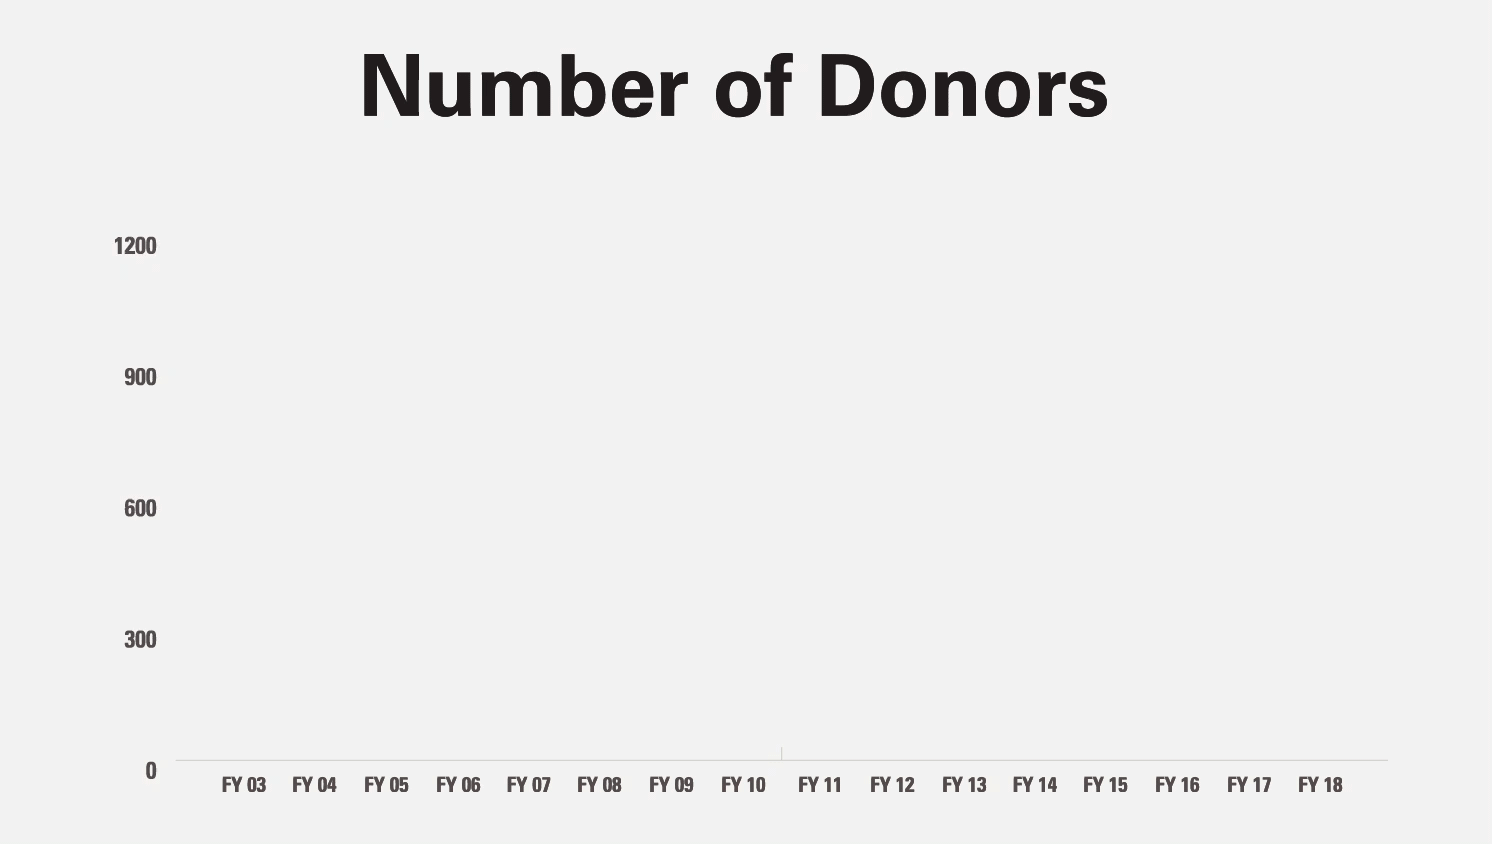 The College of Education received gifts from 1,047 donors in FY 2018.